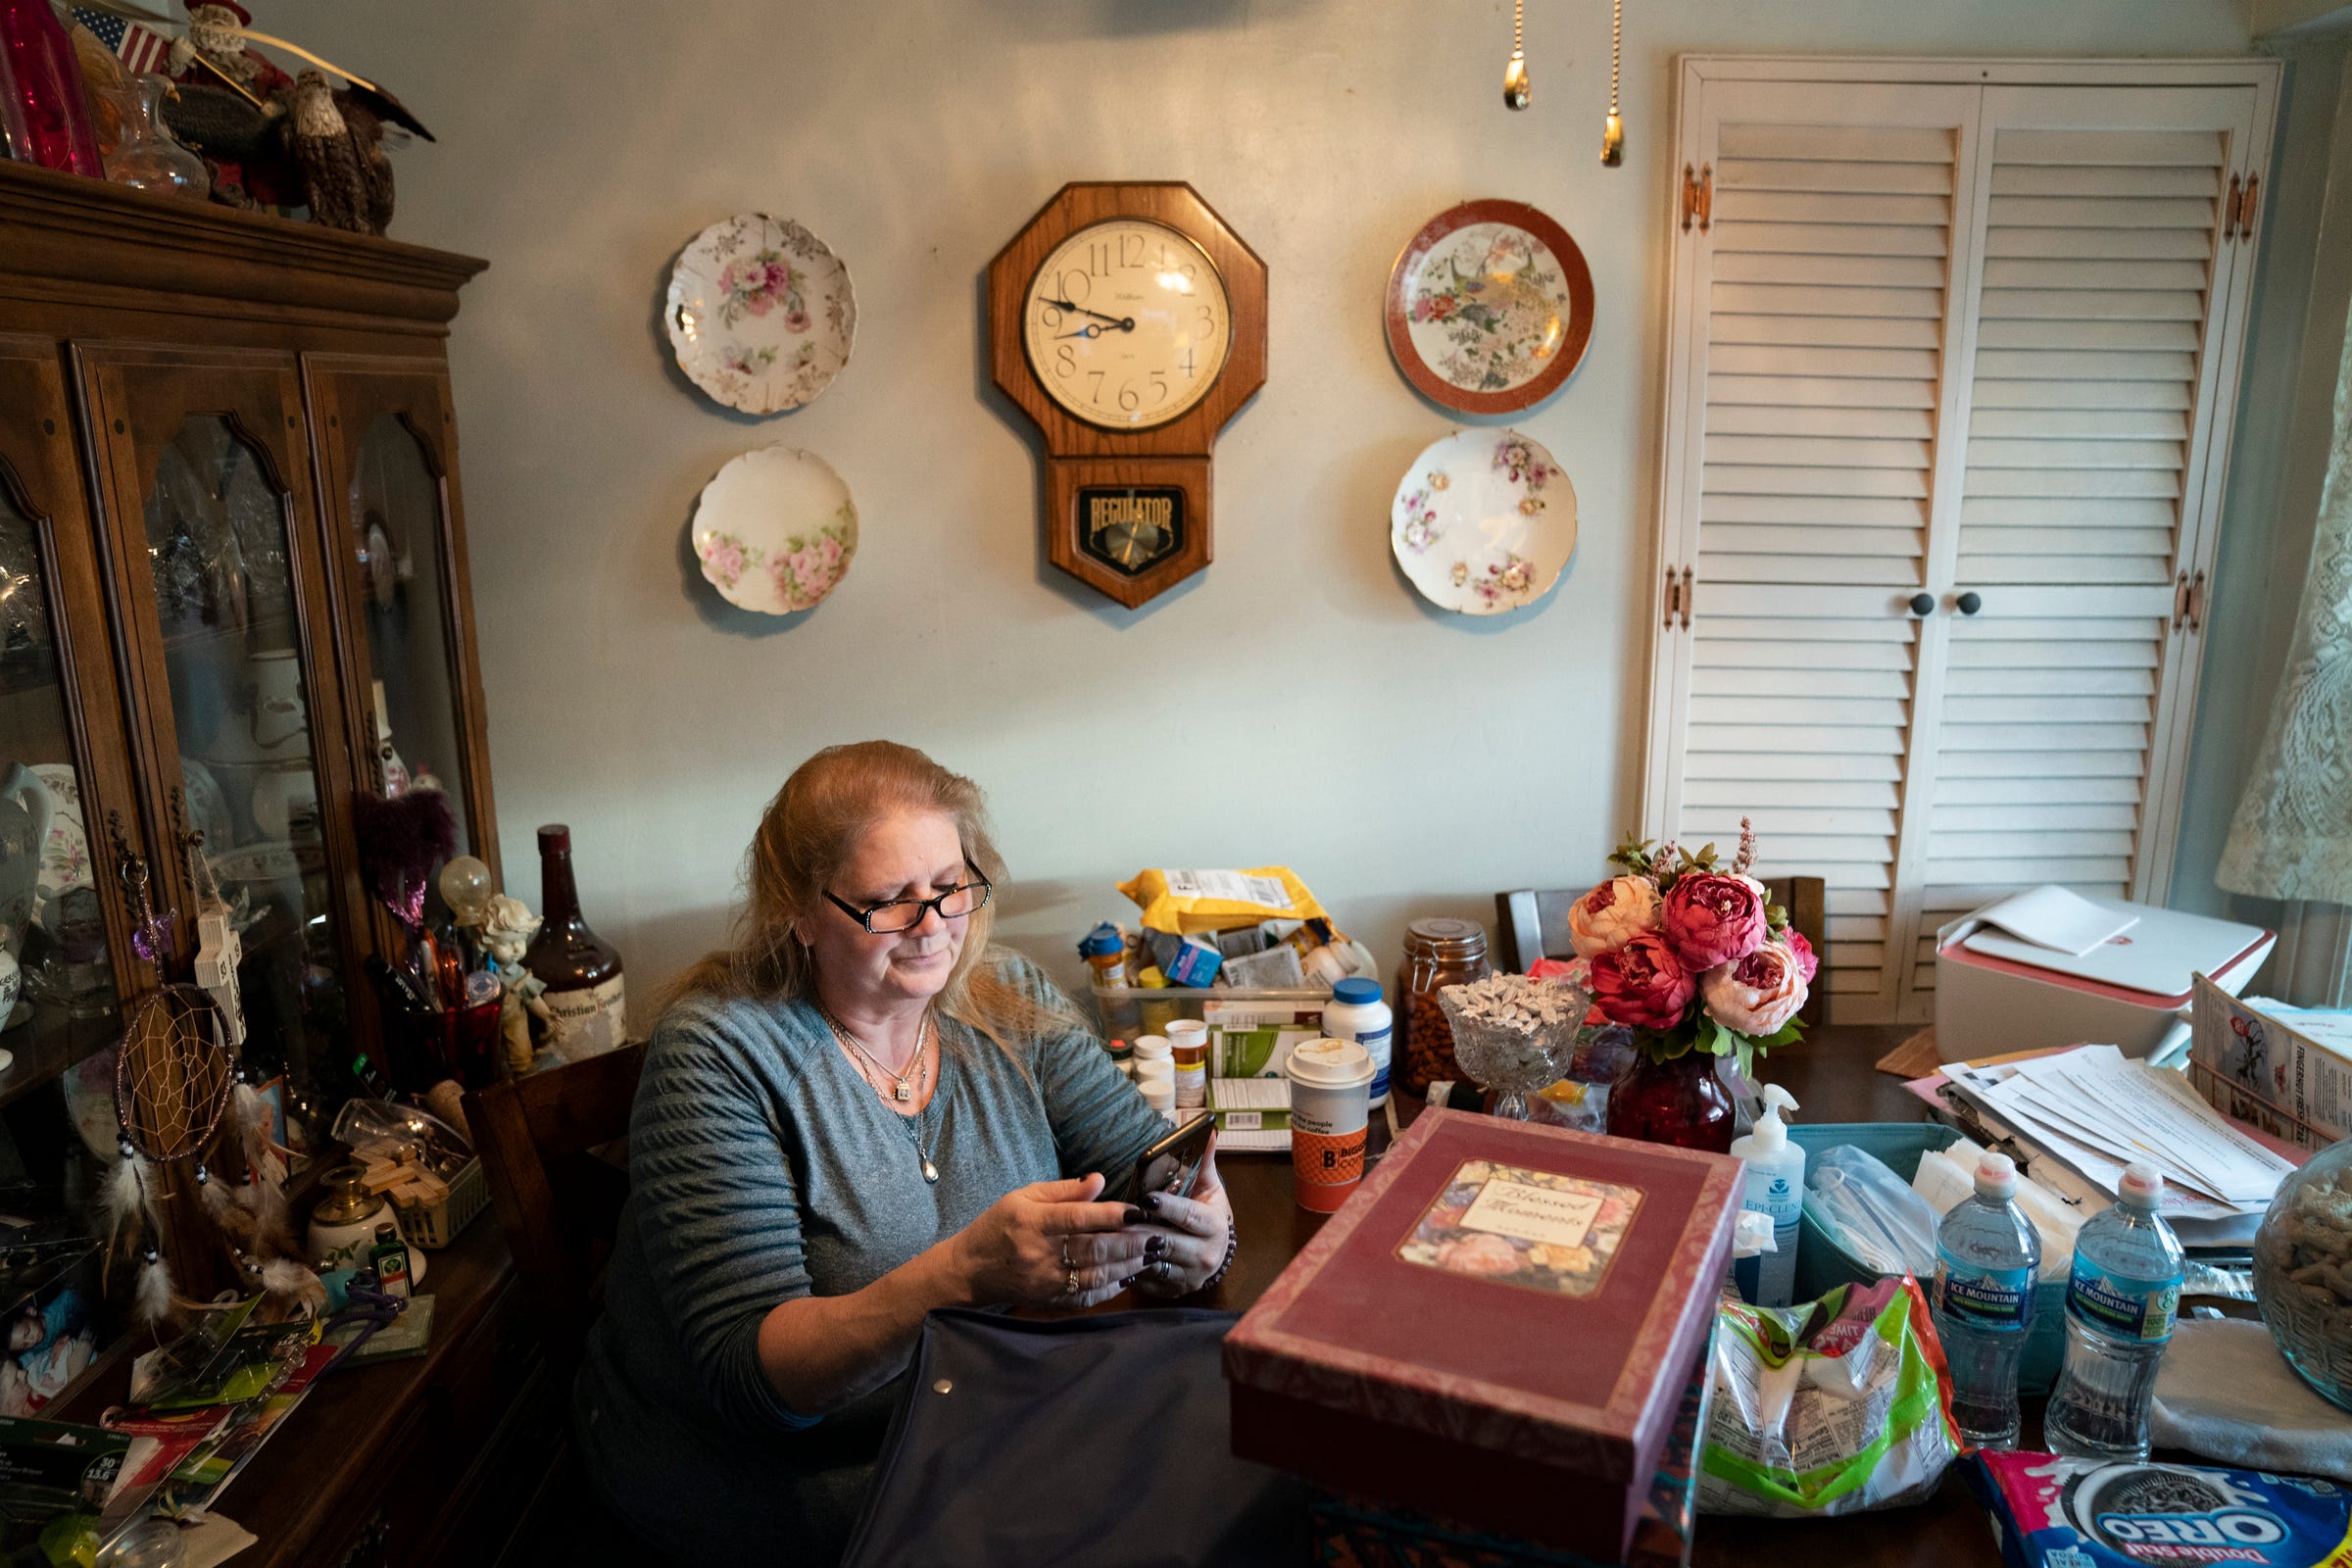 Kathi Kuykendall looks through family photos at her home in Allen Park.